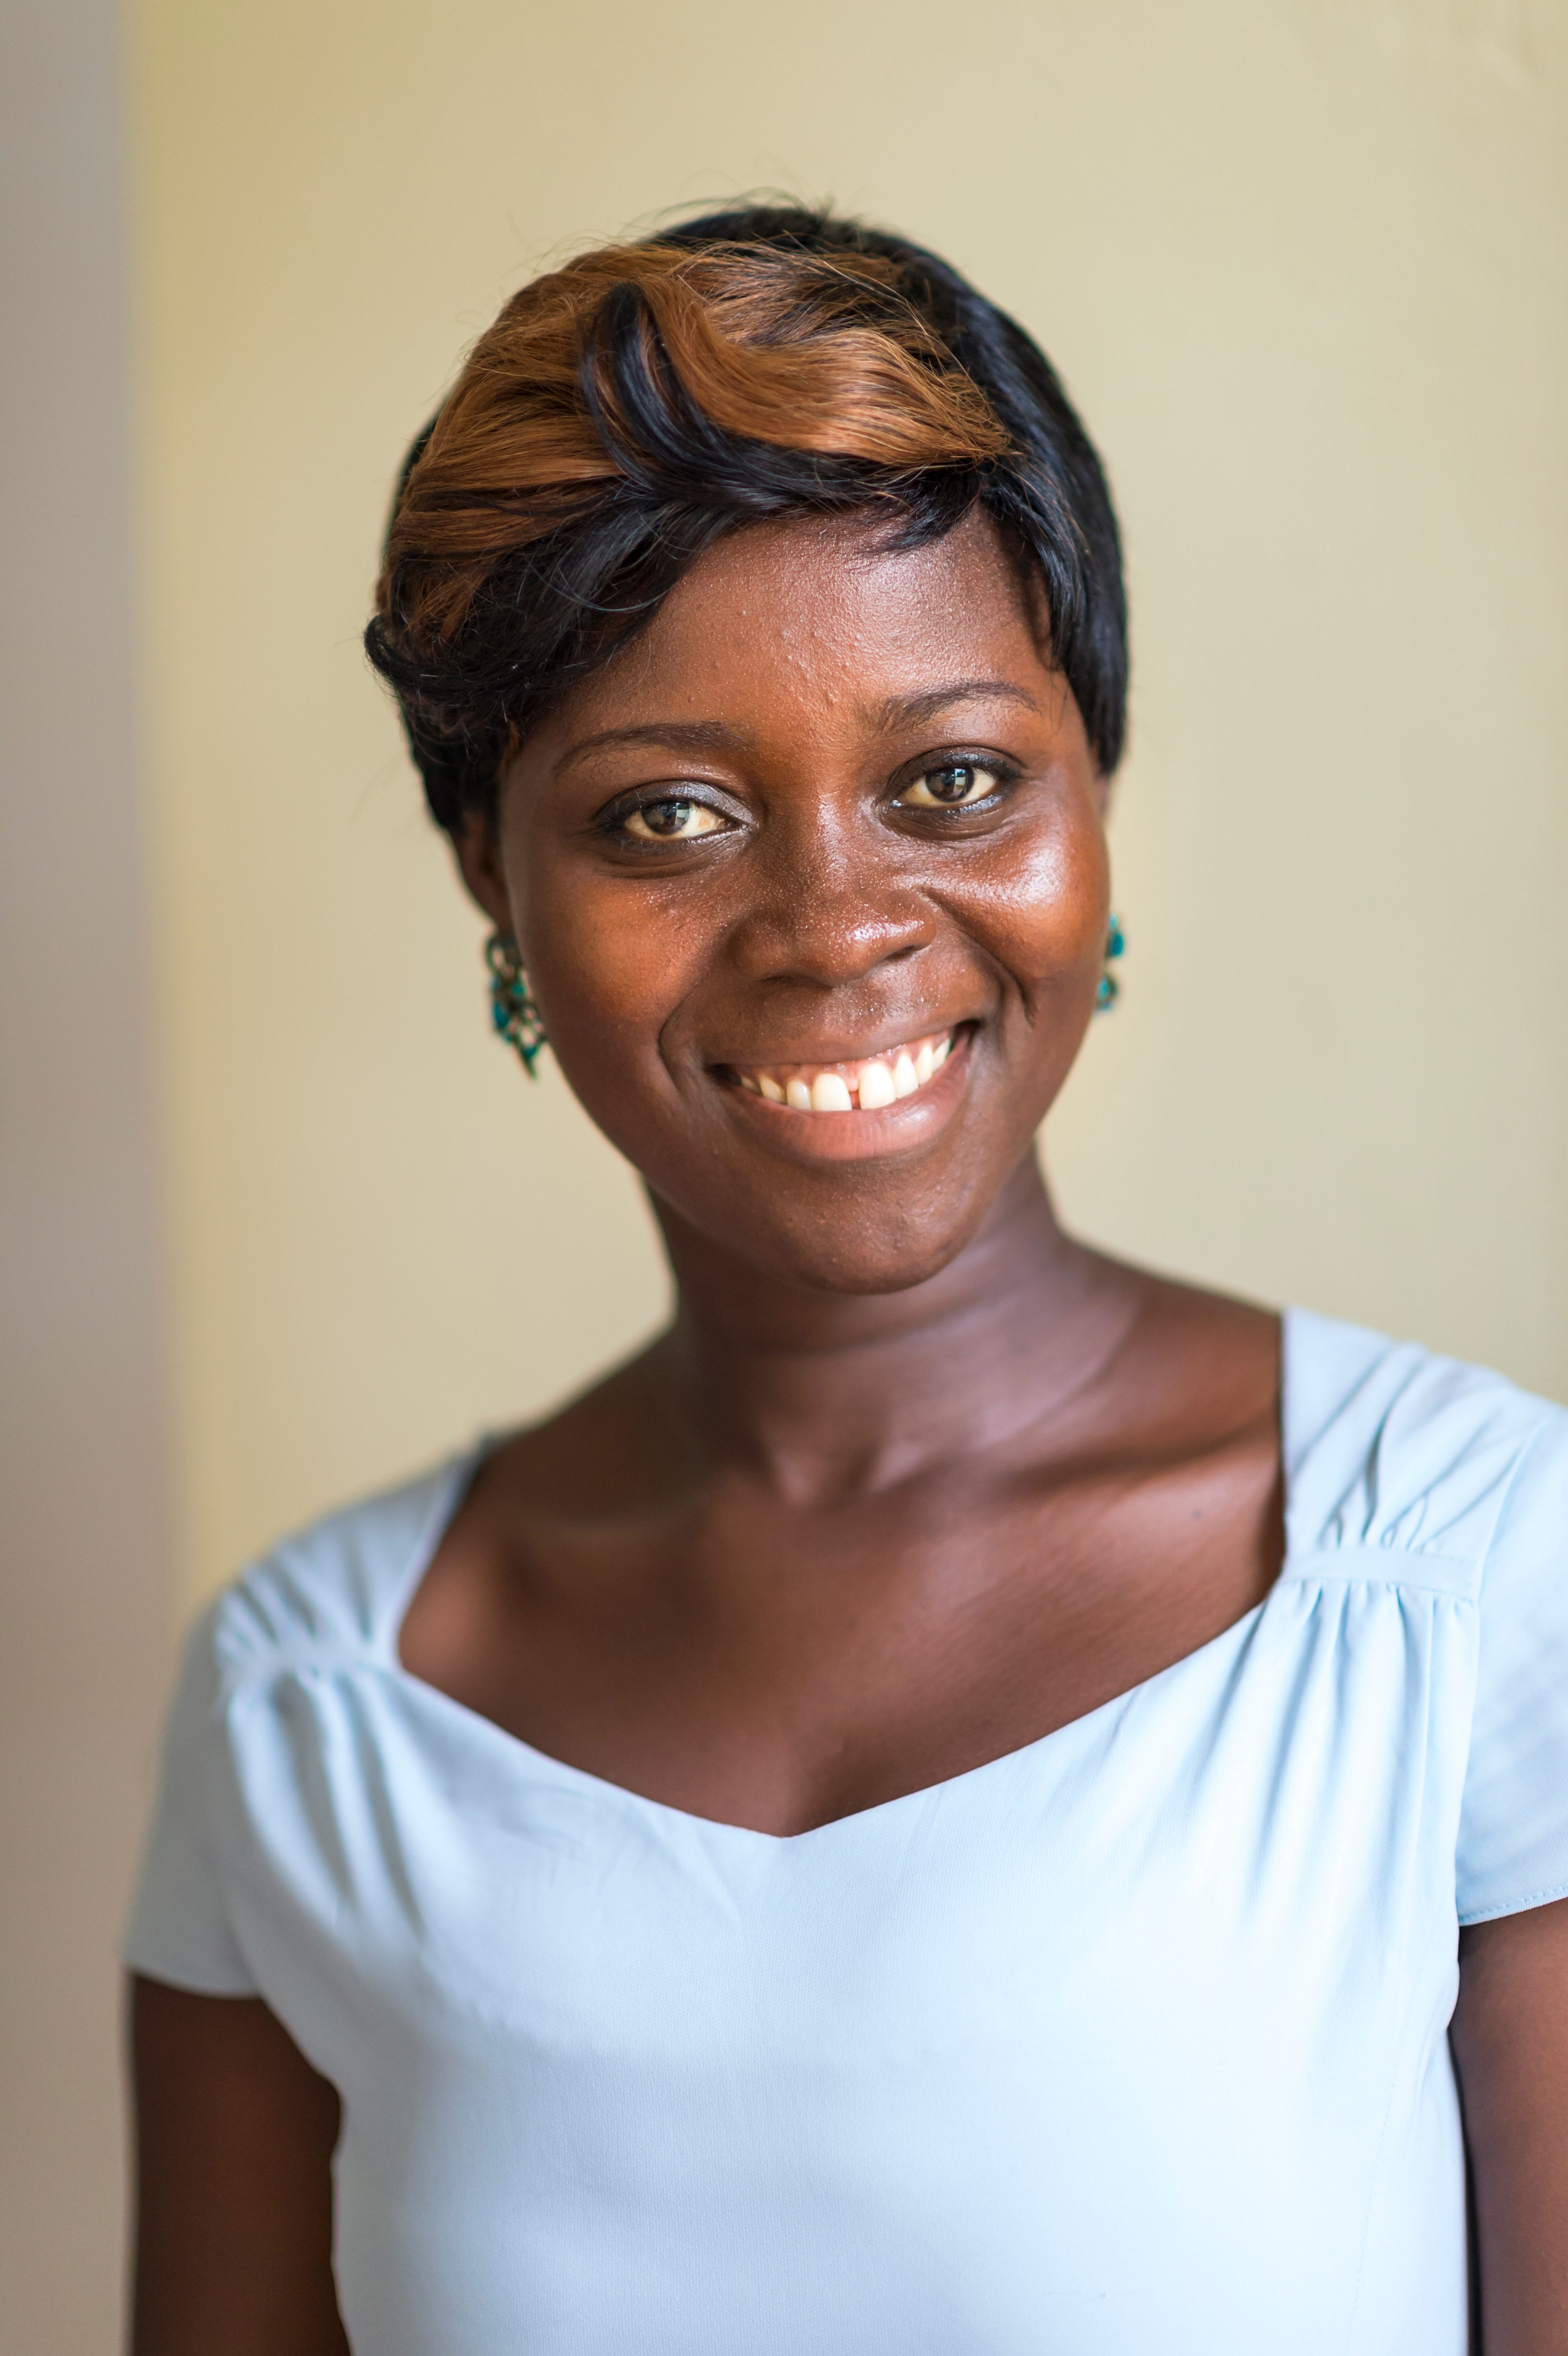 A portrait of a young woman in Africa, wearing a blue blouse, smiling.